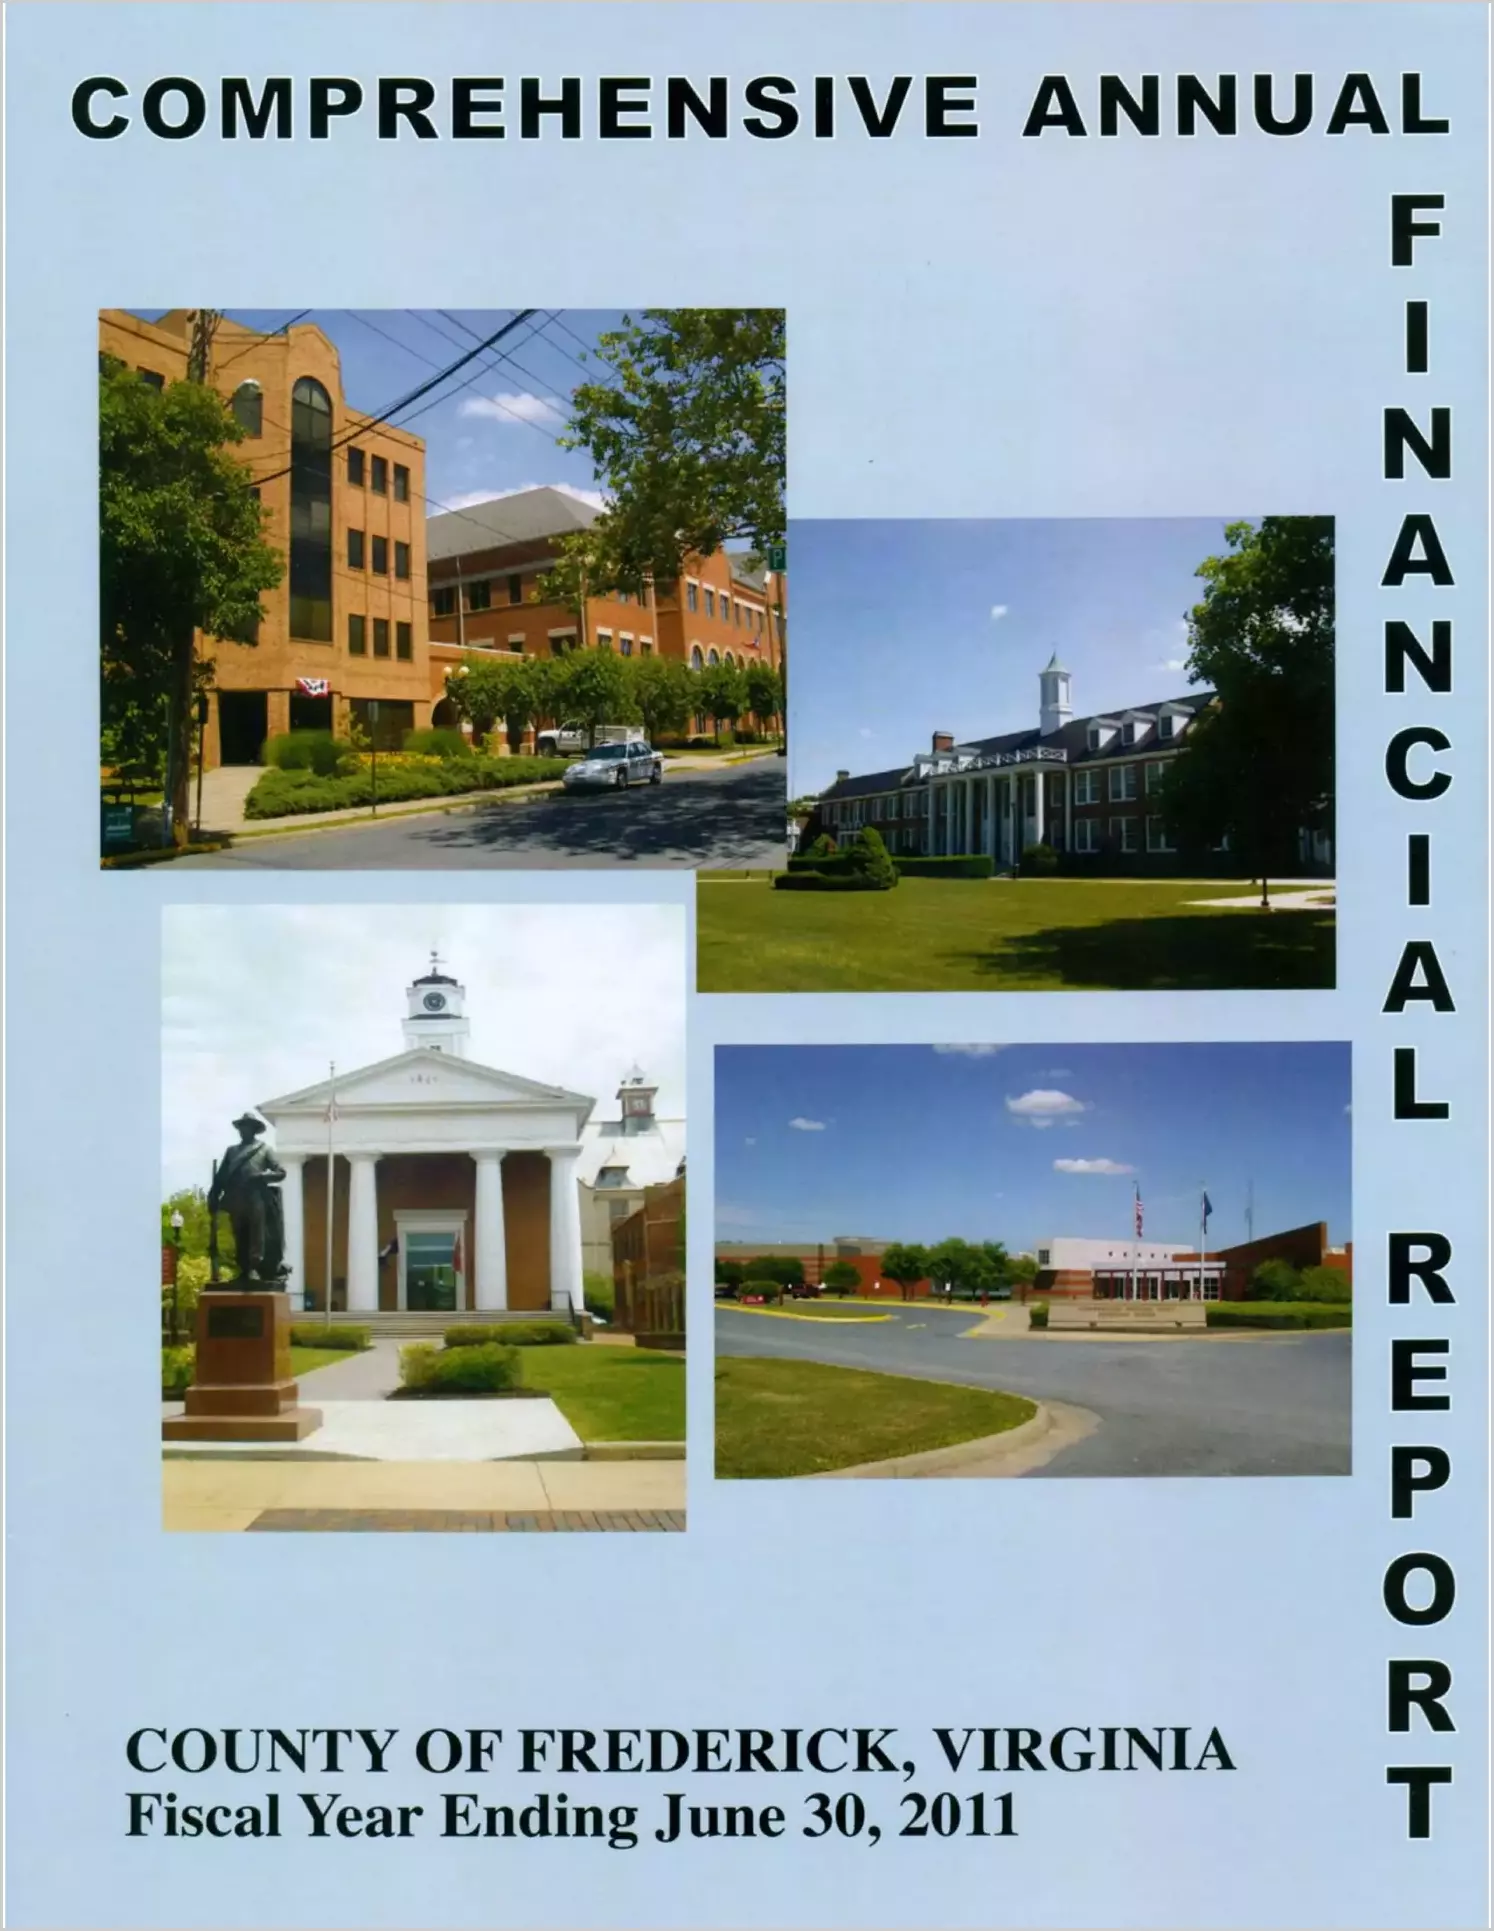 2011 Annual Financial Report for County of Frederick